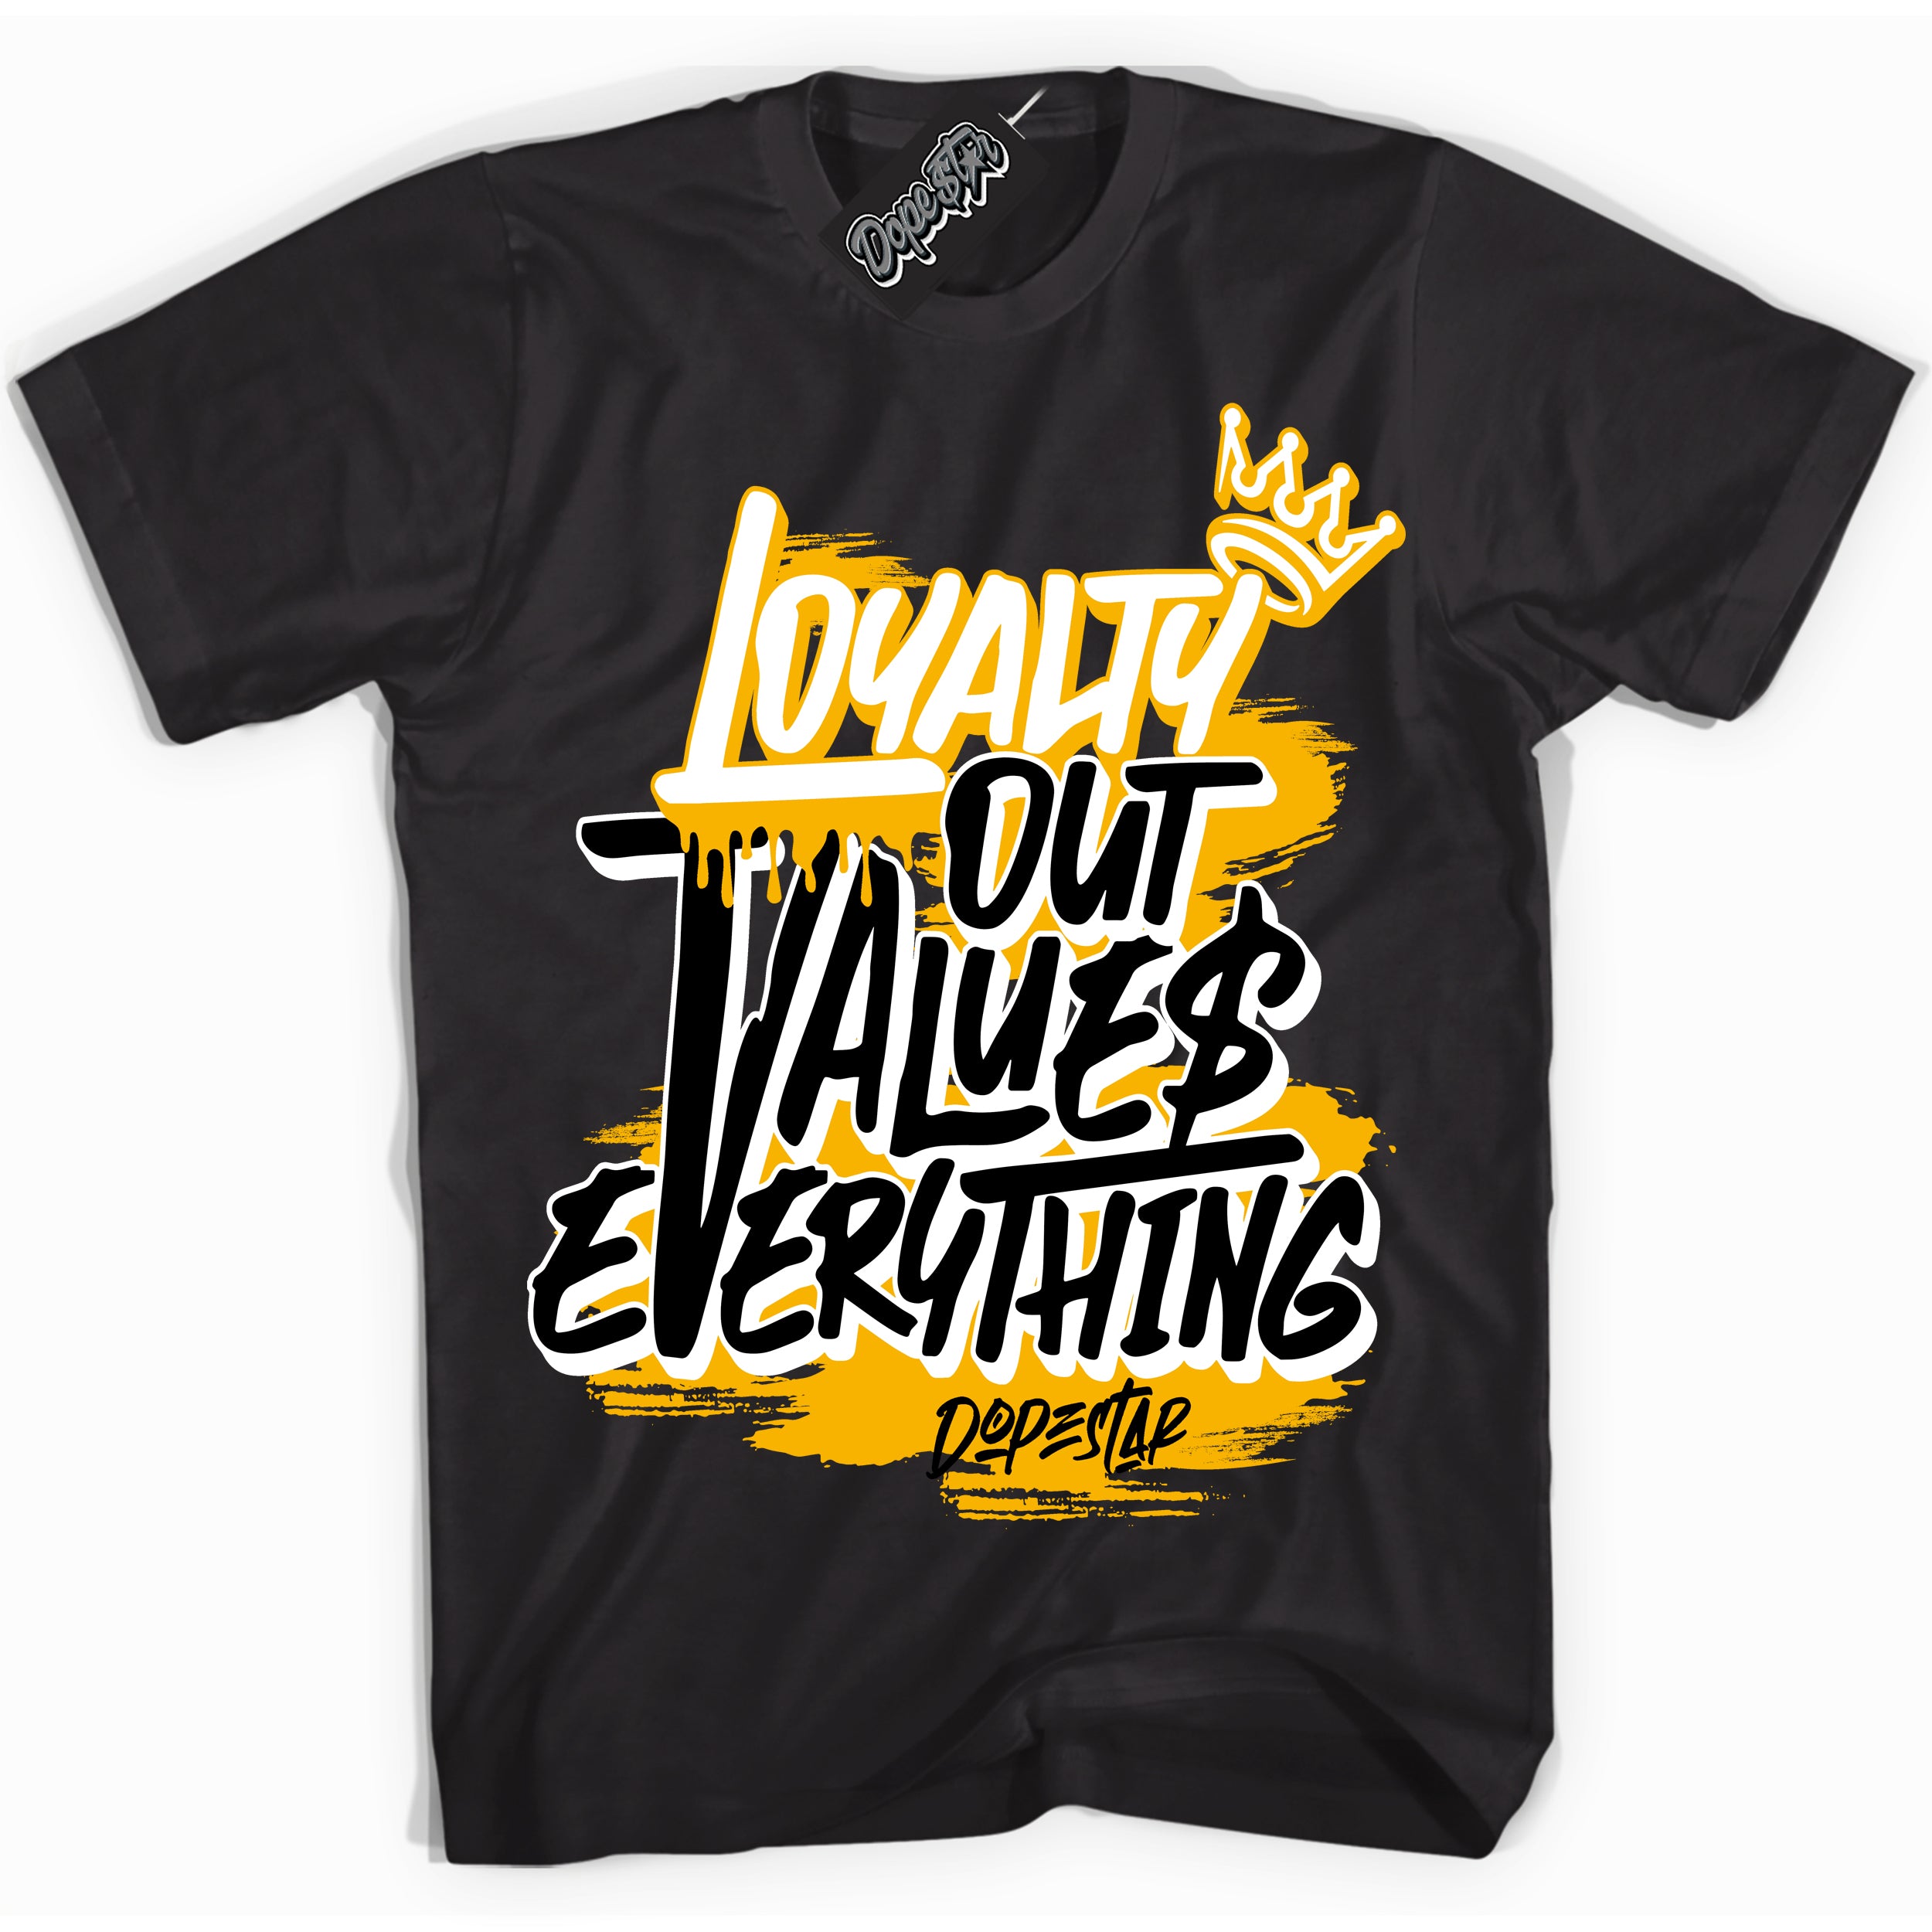 Cool Black Shirt with “ Loyalty Out Values Everything” design that perfectly matches Reverse Goldenrod 2024 Sneakers.